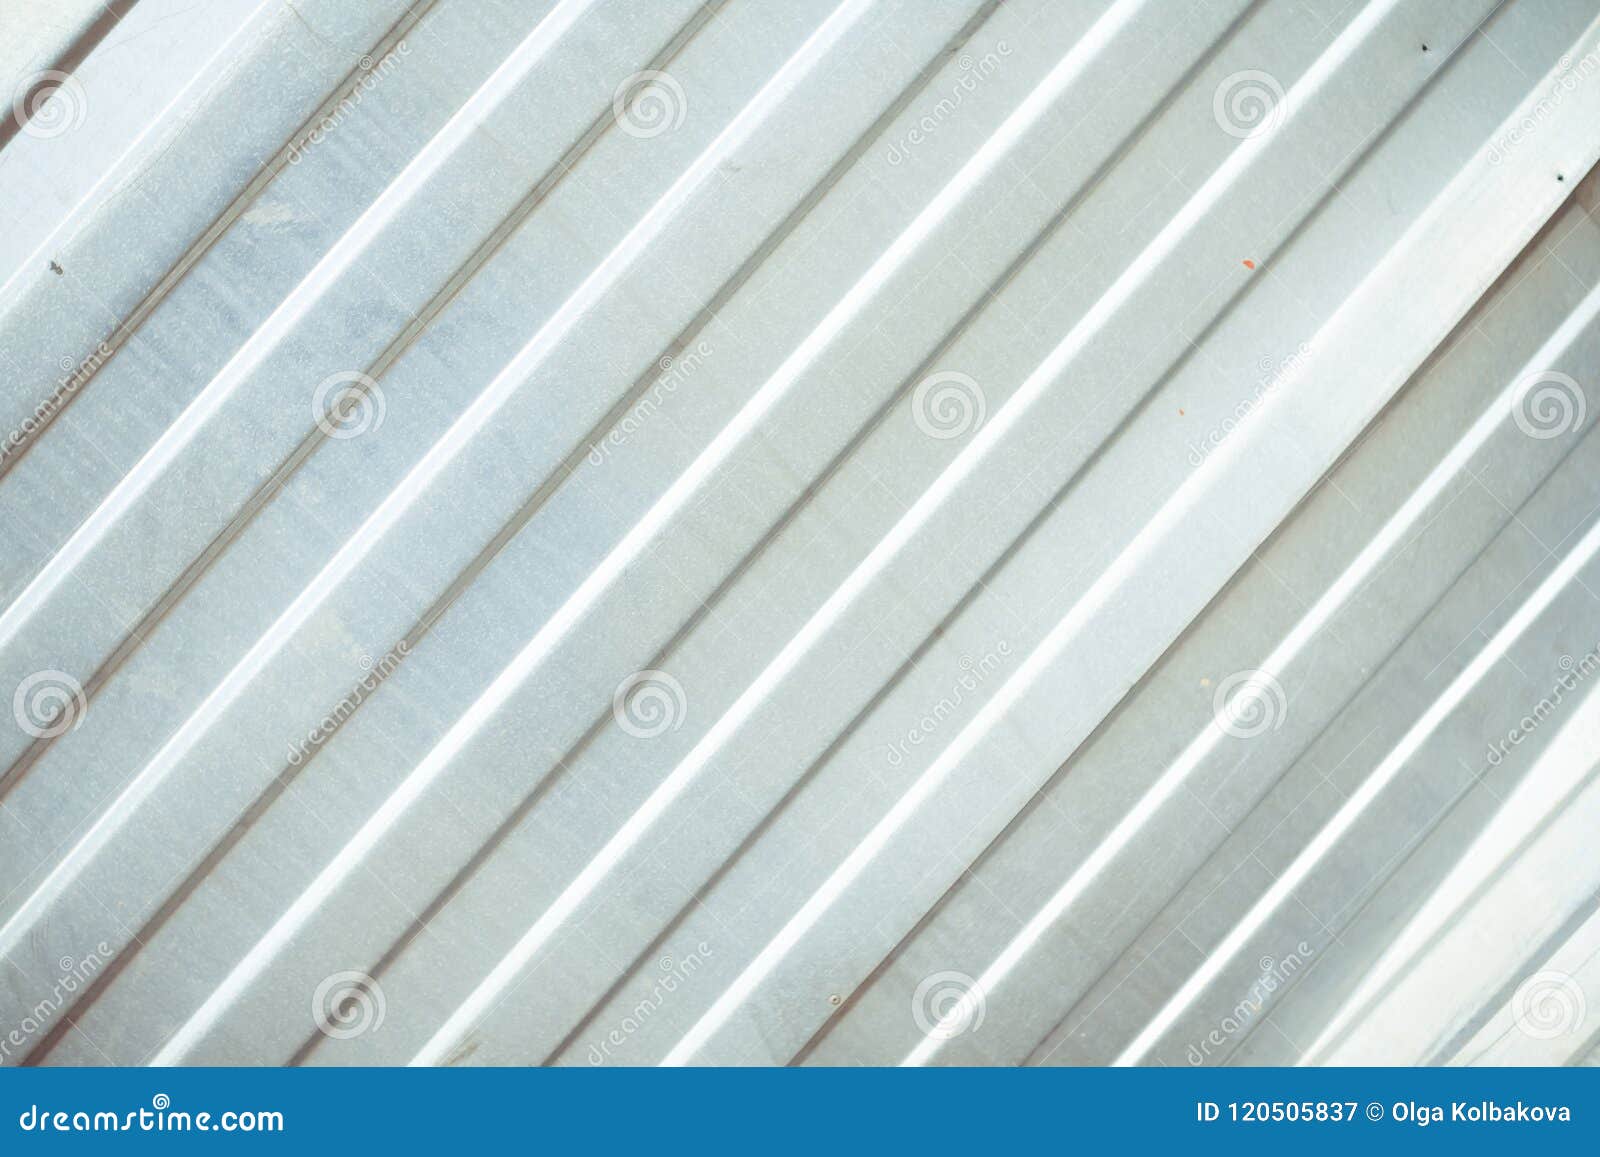 Grooved metal texture stock image. Image of gray, material - 120505837